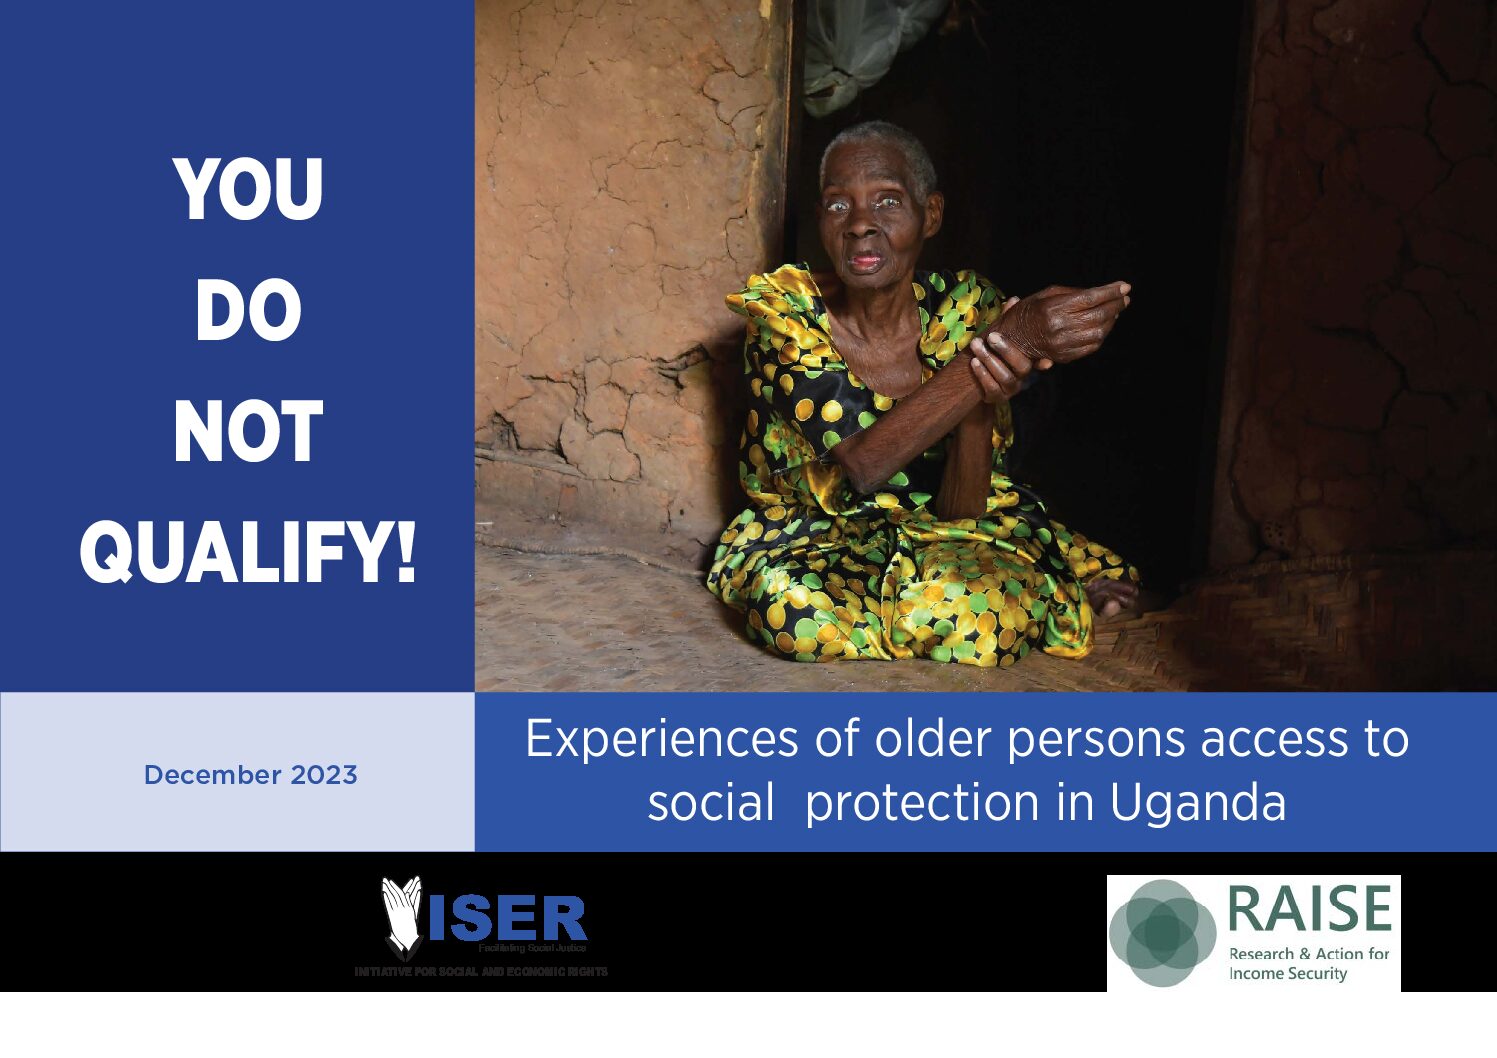 You do not qualify!: Experiences of older persons' access to social protection in Uganda